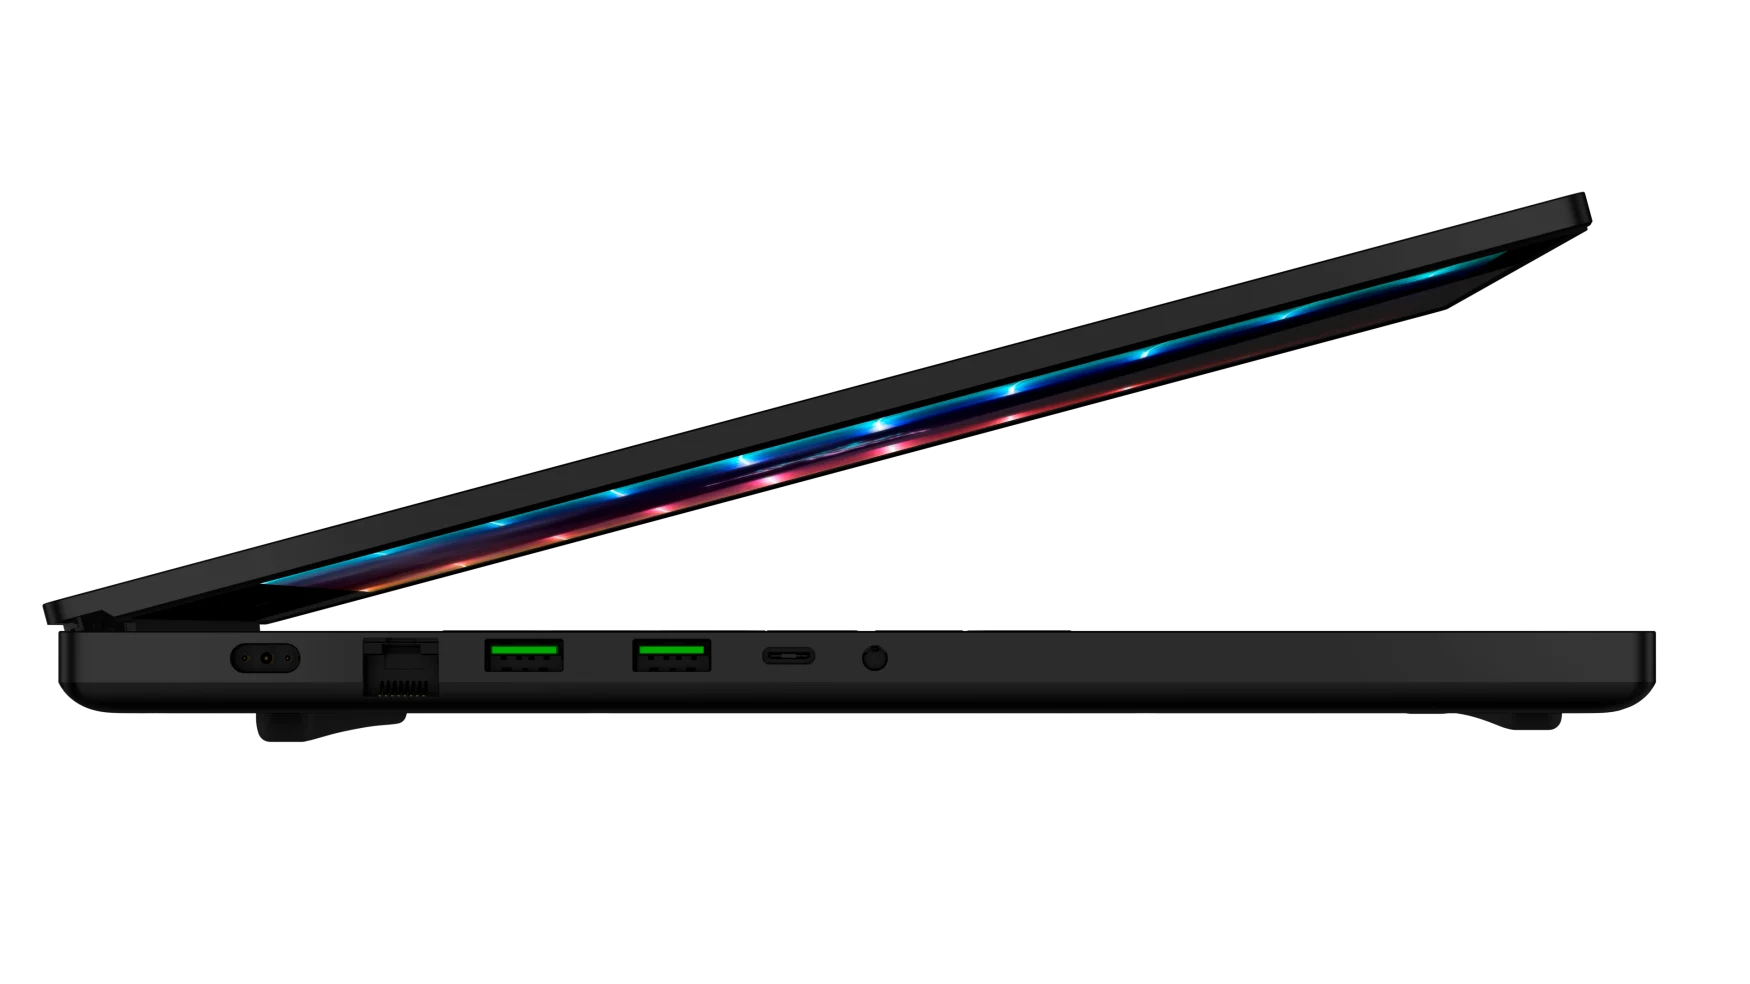 Razer unveils its latest Blade 17 laptop with 11th-gen Core i9 CPUs